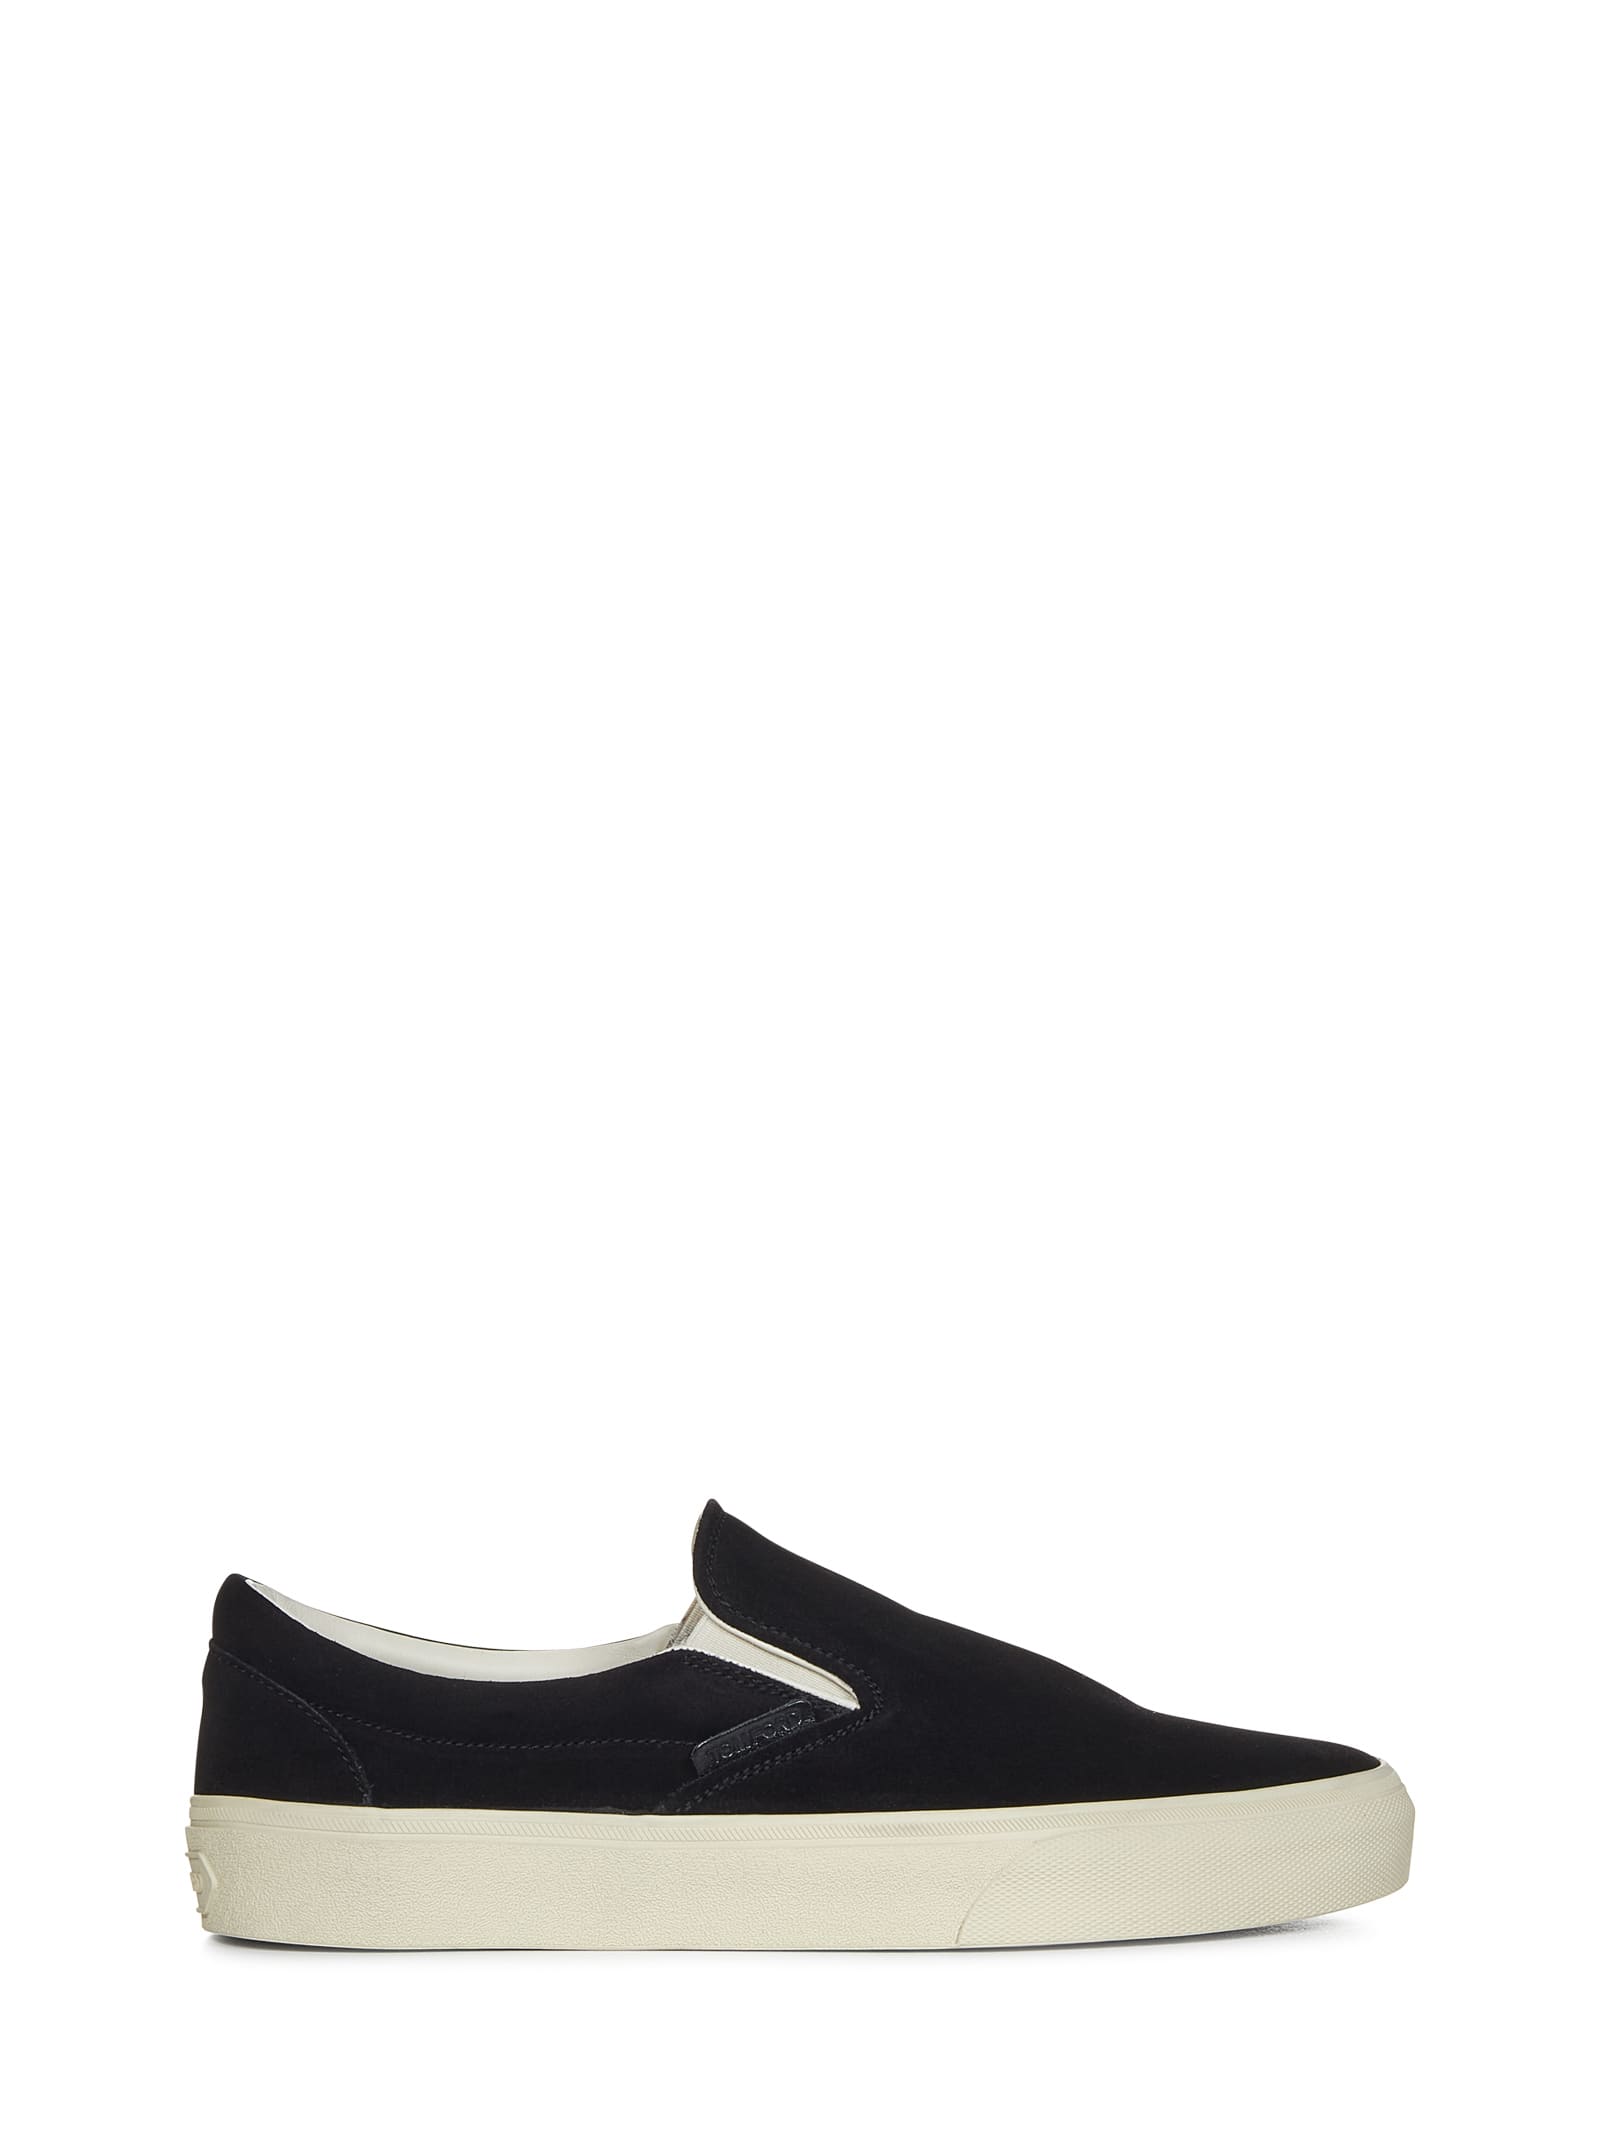 TOM FORD SNEAKERS